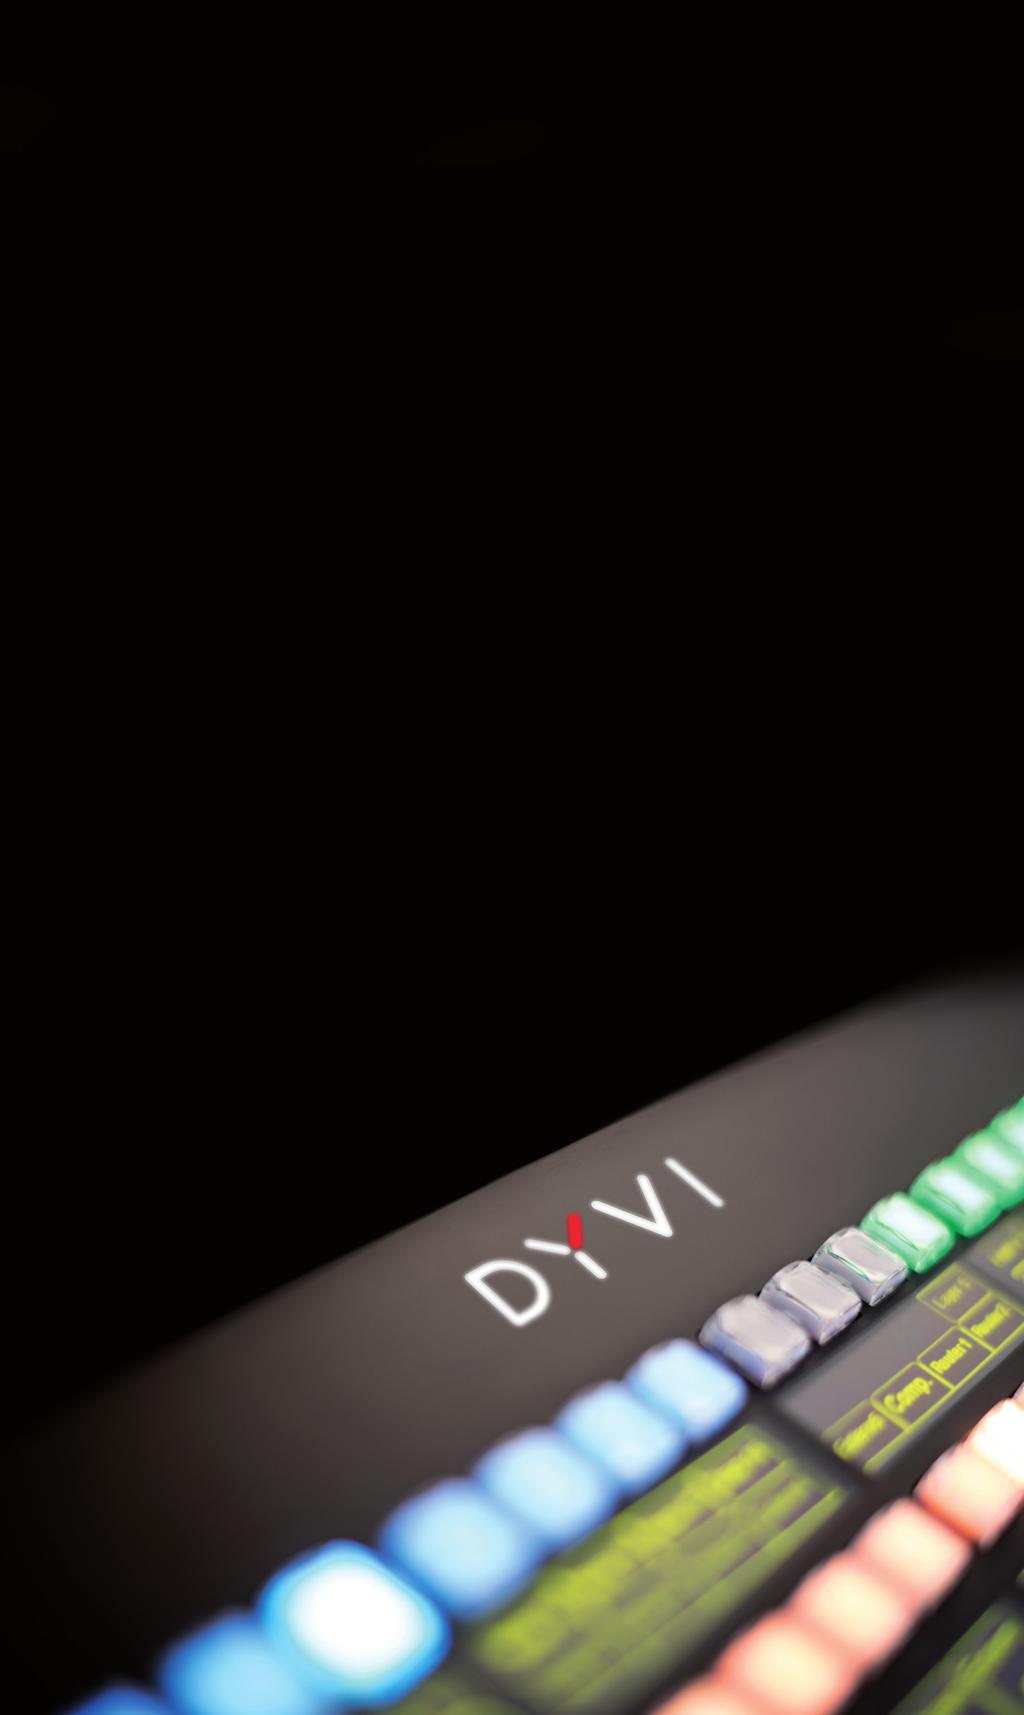 Create. Control. Connect. Control live broadcasting wherever you are The DYVI production suite is a whole new approach to live content creation.